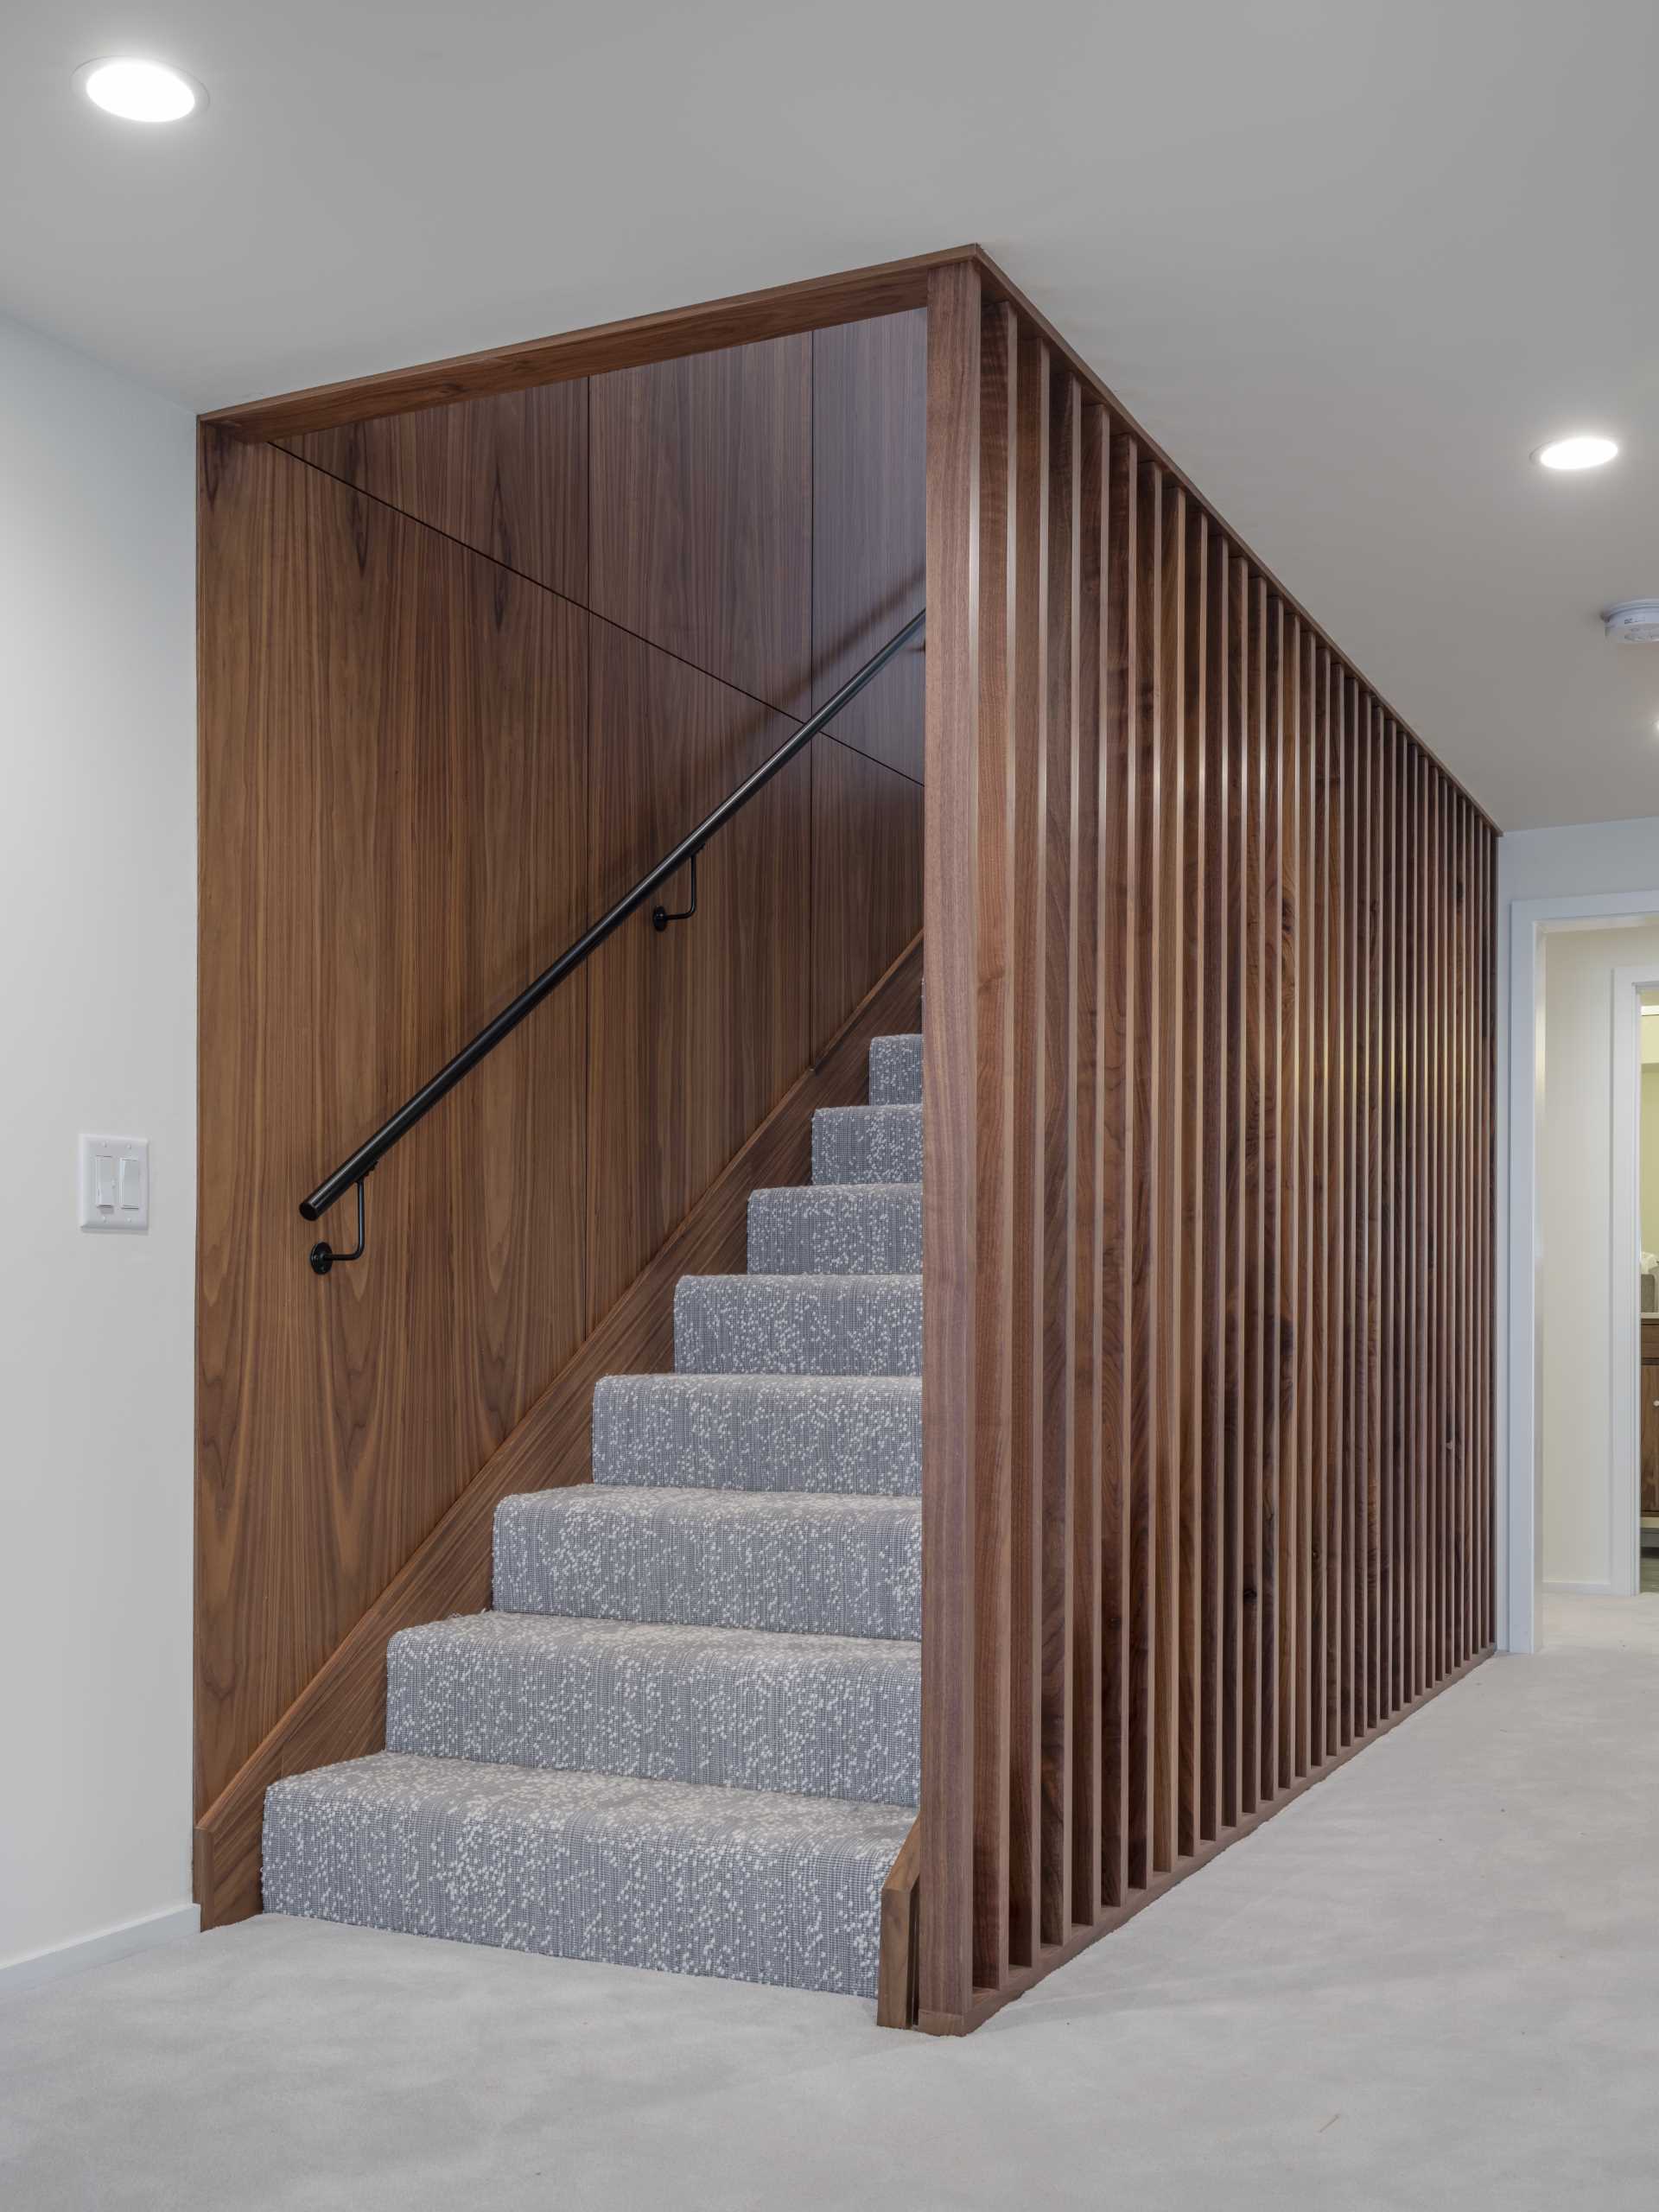 Contemporary stairs with wood accent surround.